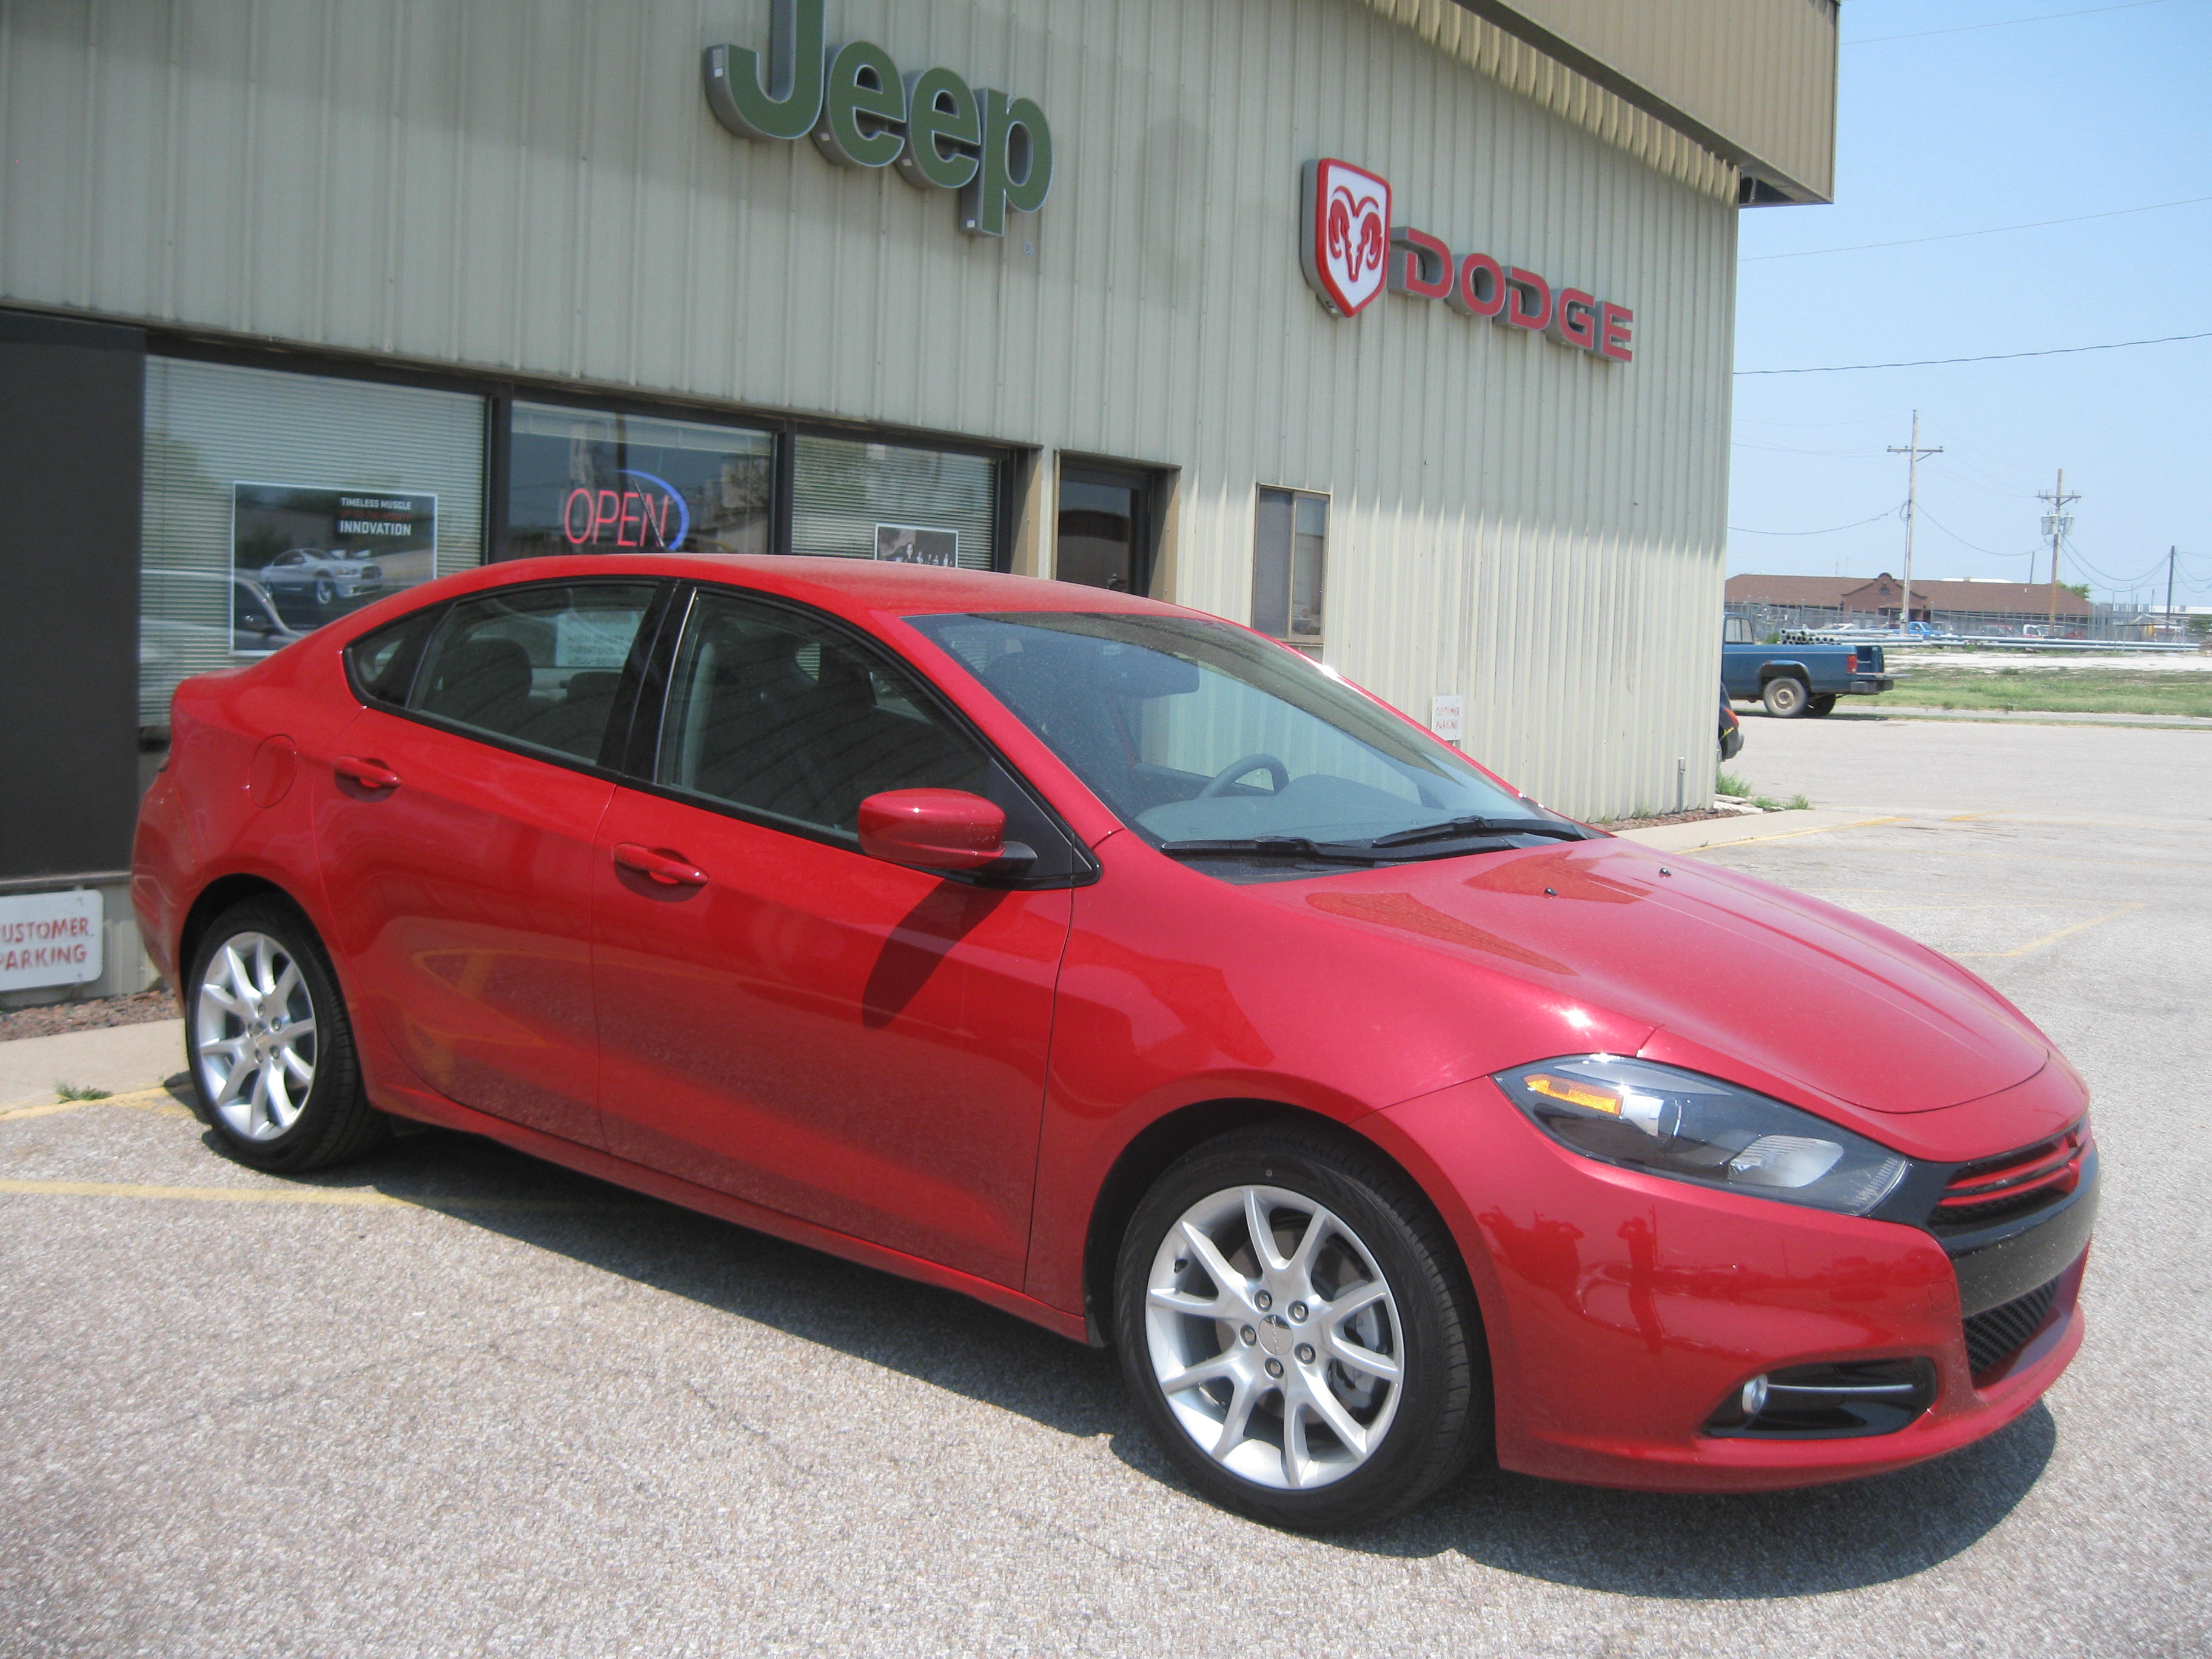 2013 Dodge Dart Rallye Coupe $23,460. Stop in and see the NEW 2013 Dodge